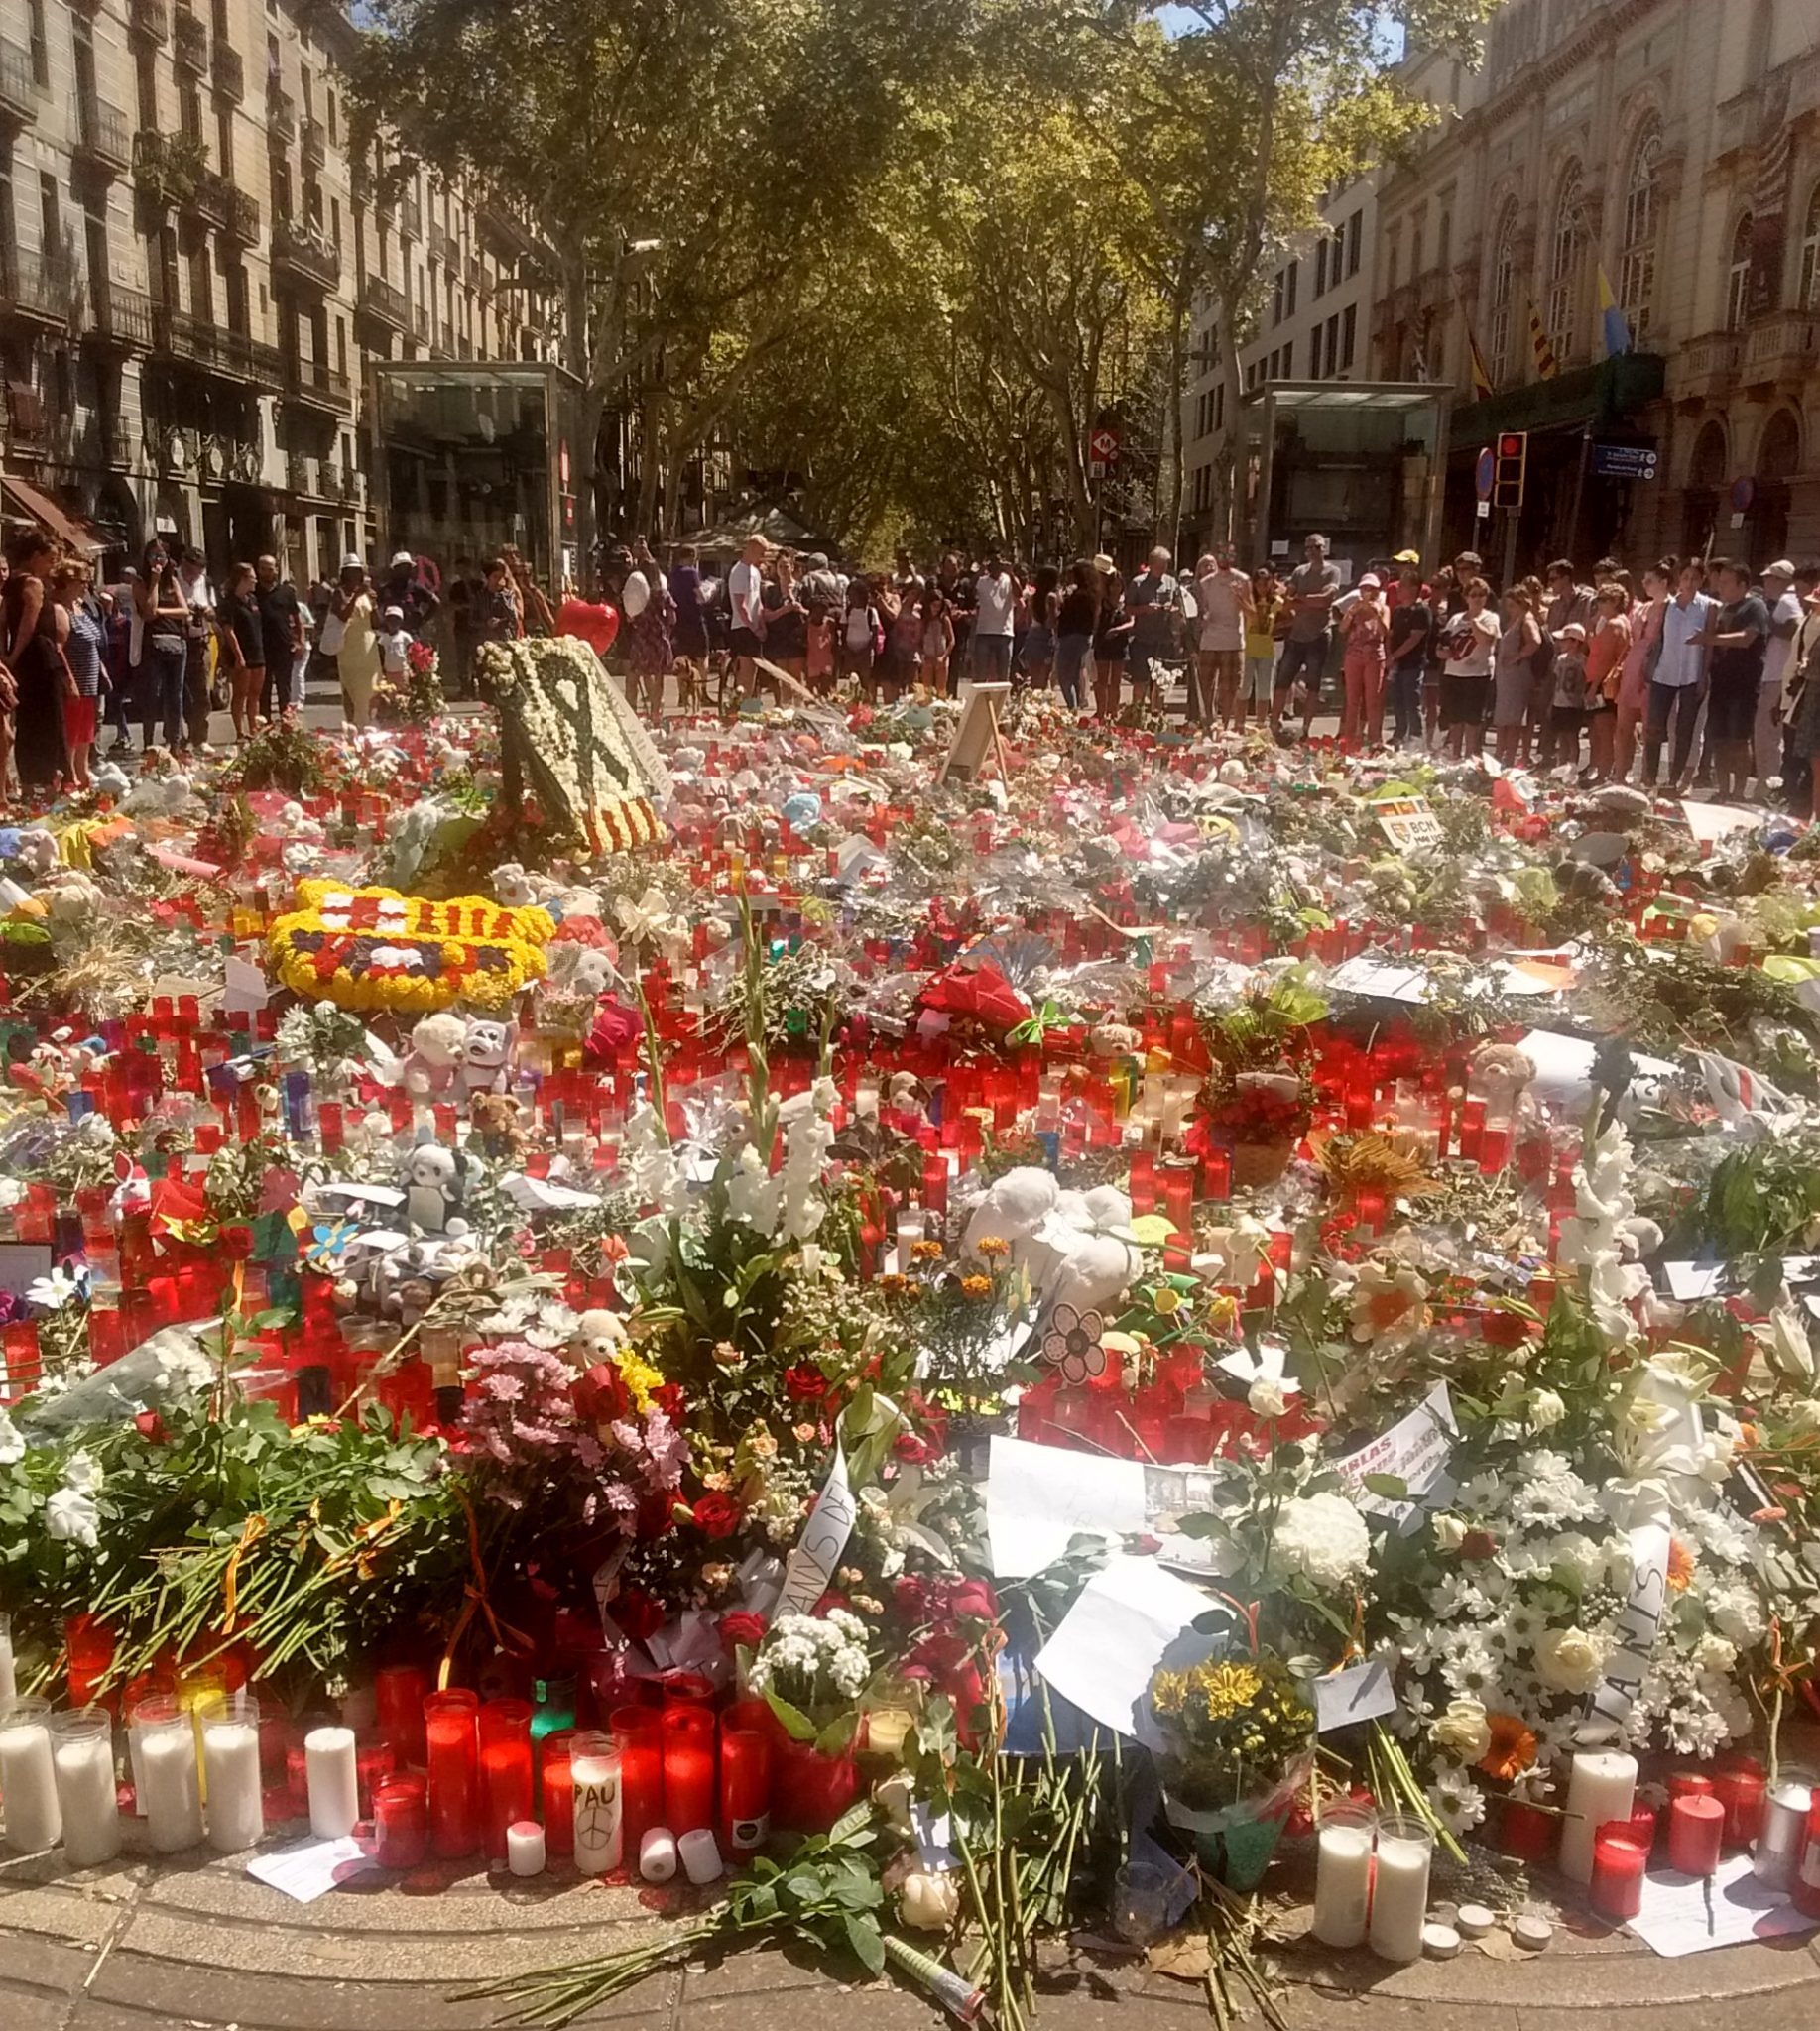 One of many memorials along La Rambla. It is still so hard to believe that this could happen in my city.